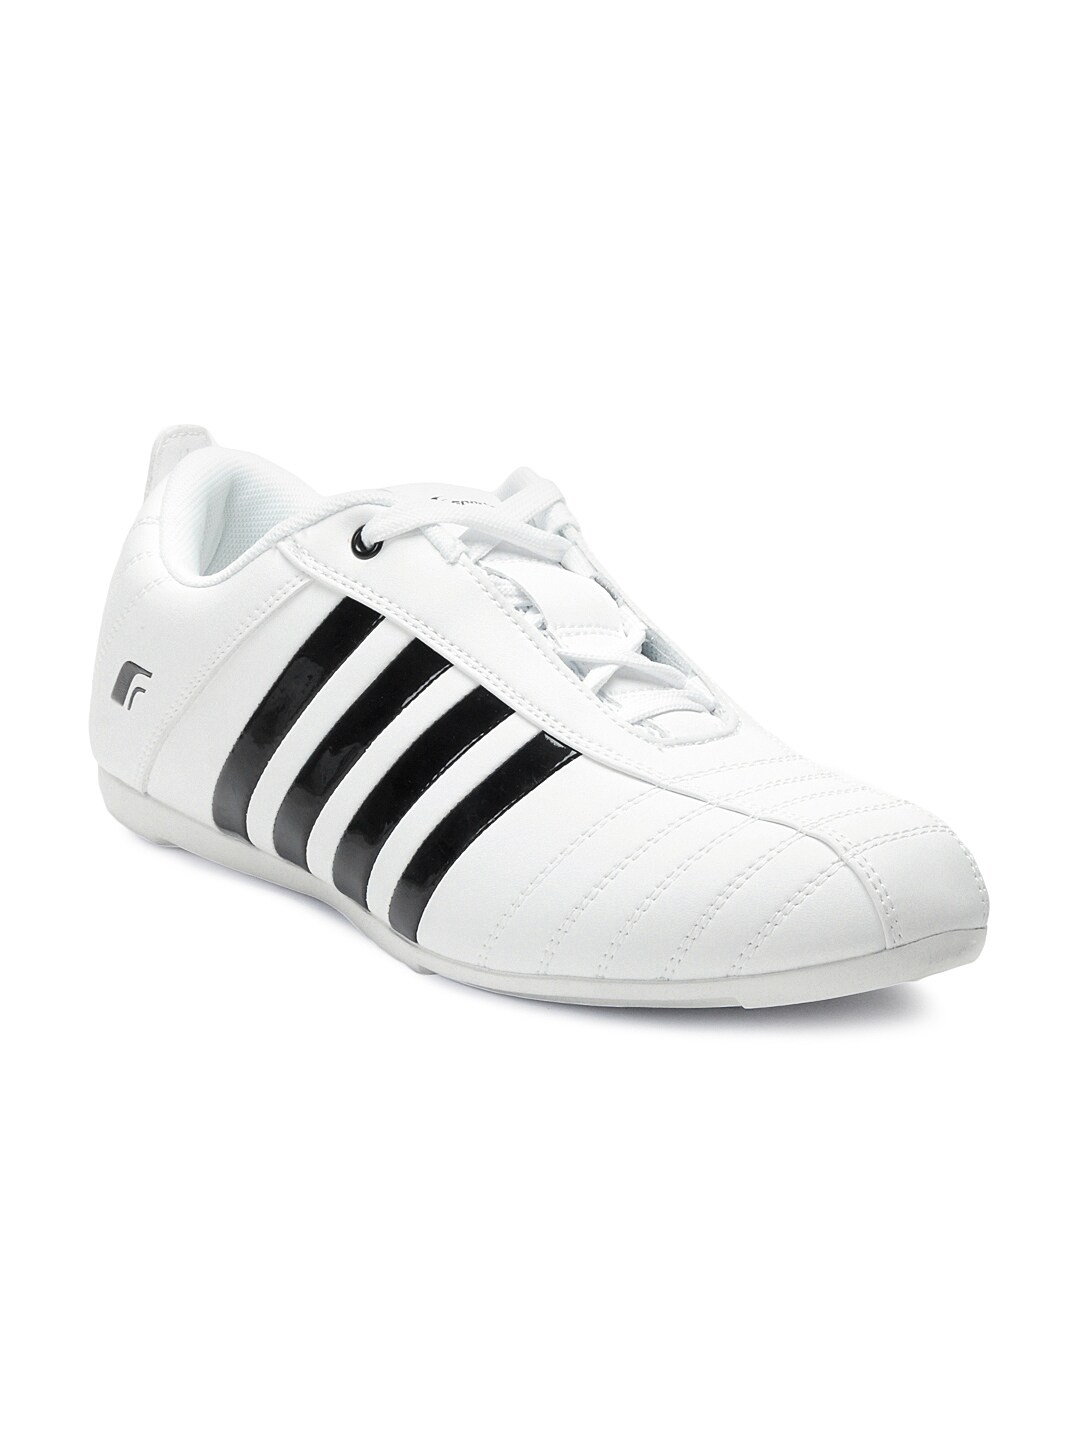 F Sports Men White Rodeo Shoes